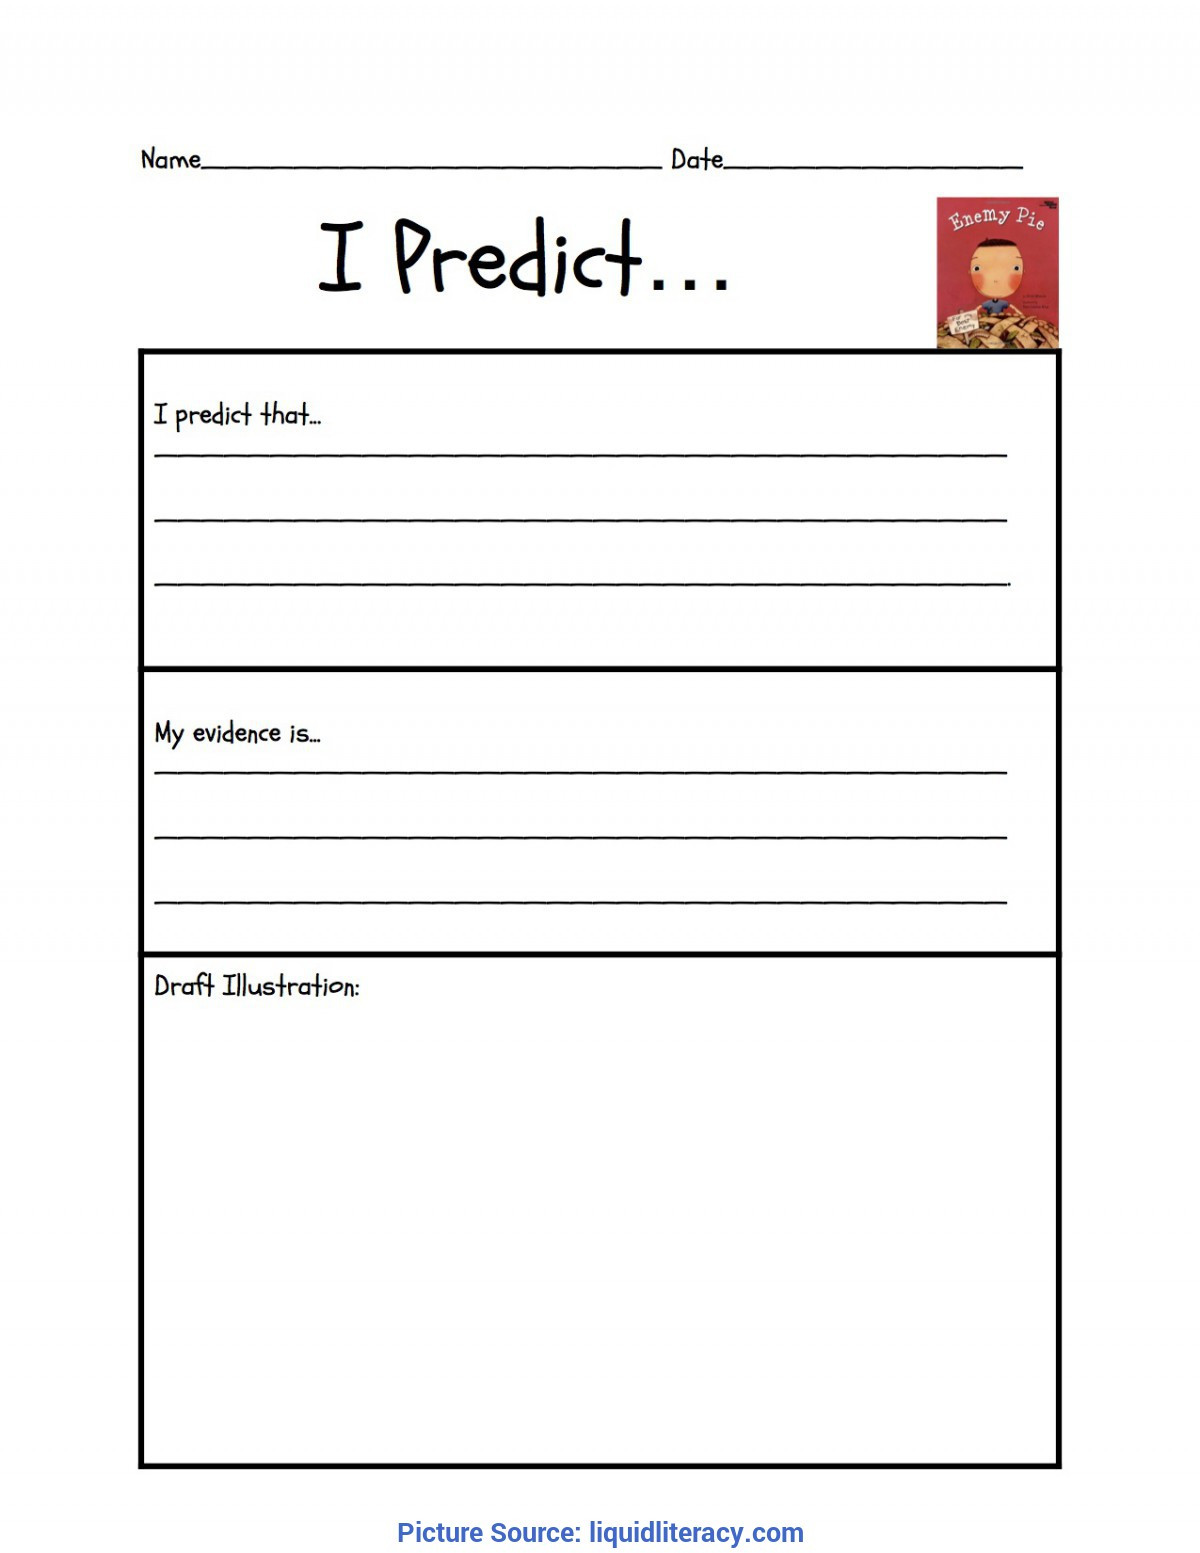 Making Predictions Worksheet 2nd Grade Workshop Classroom Making Inferences Mini Lessons